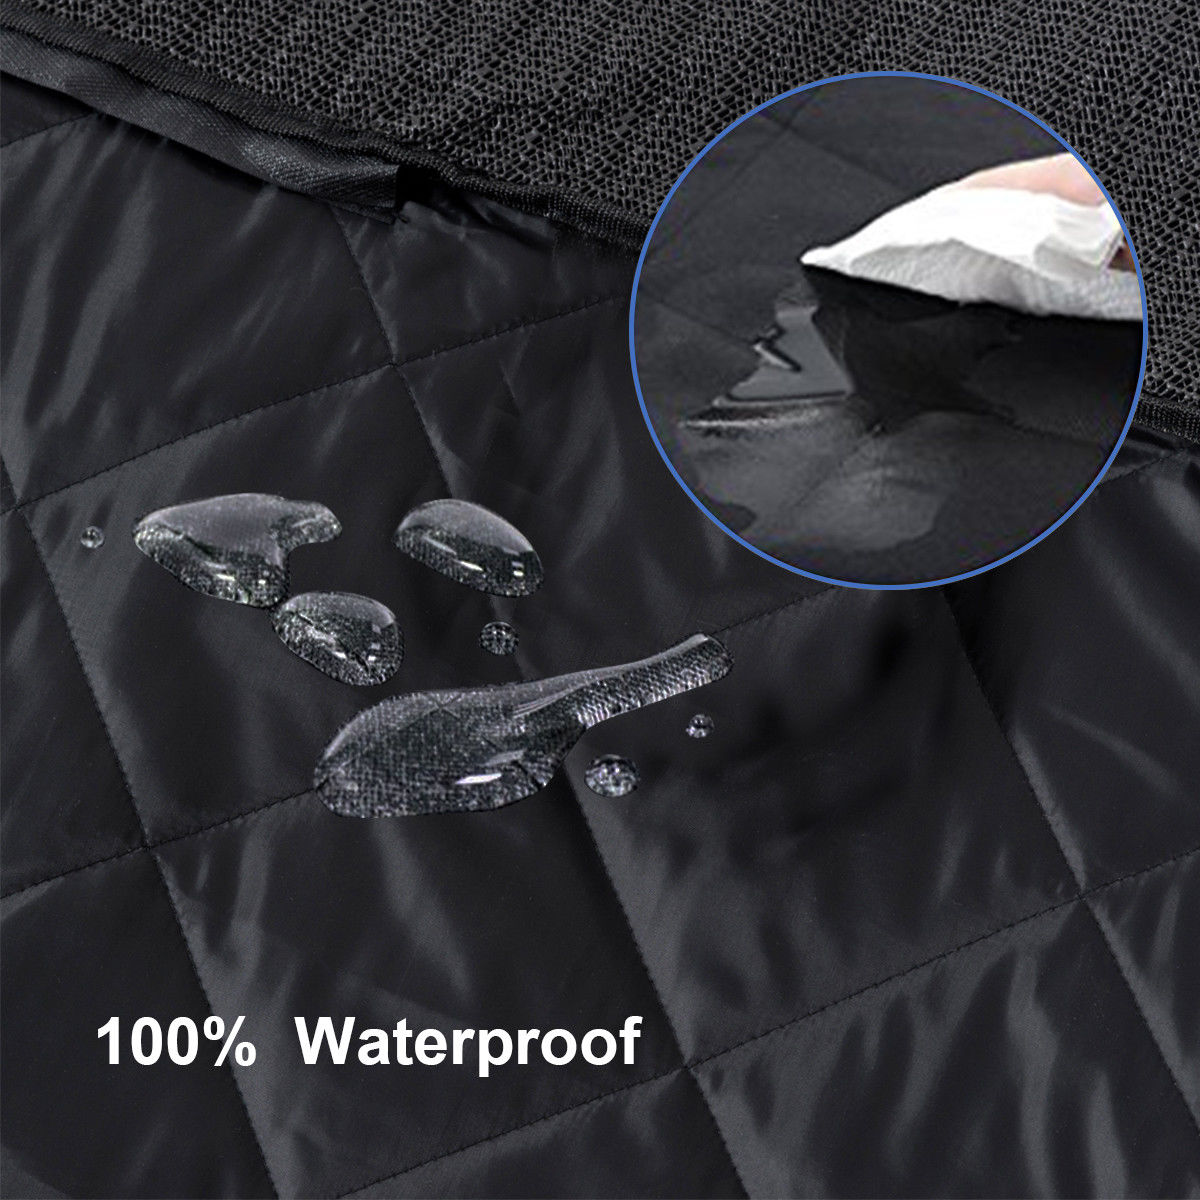 Gymax Black Waterproof Pet Front Seat Cover For Cars Nonslip Rubber Backing w/ Anchor - image 4 of 10